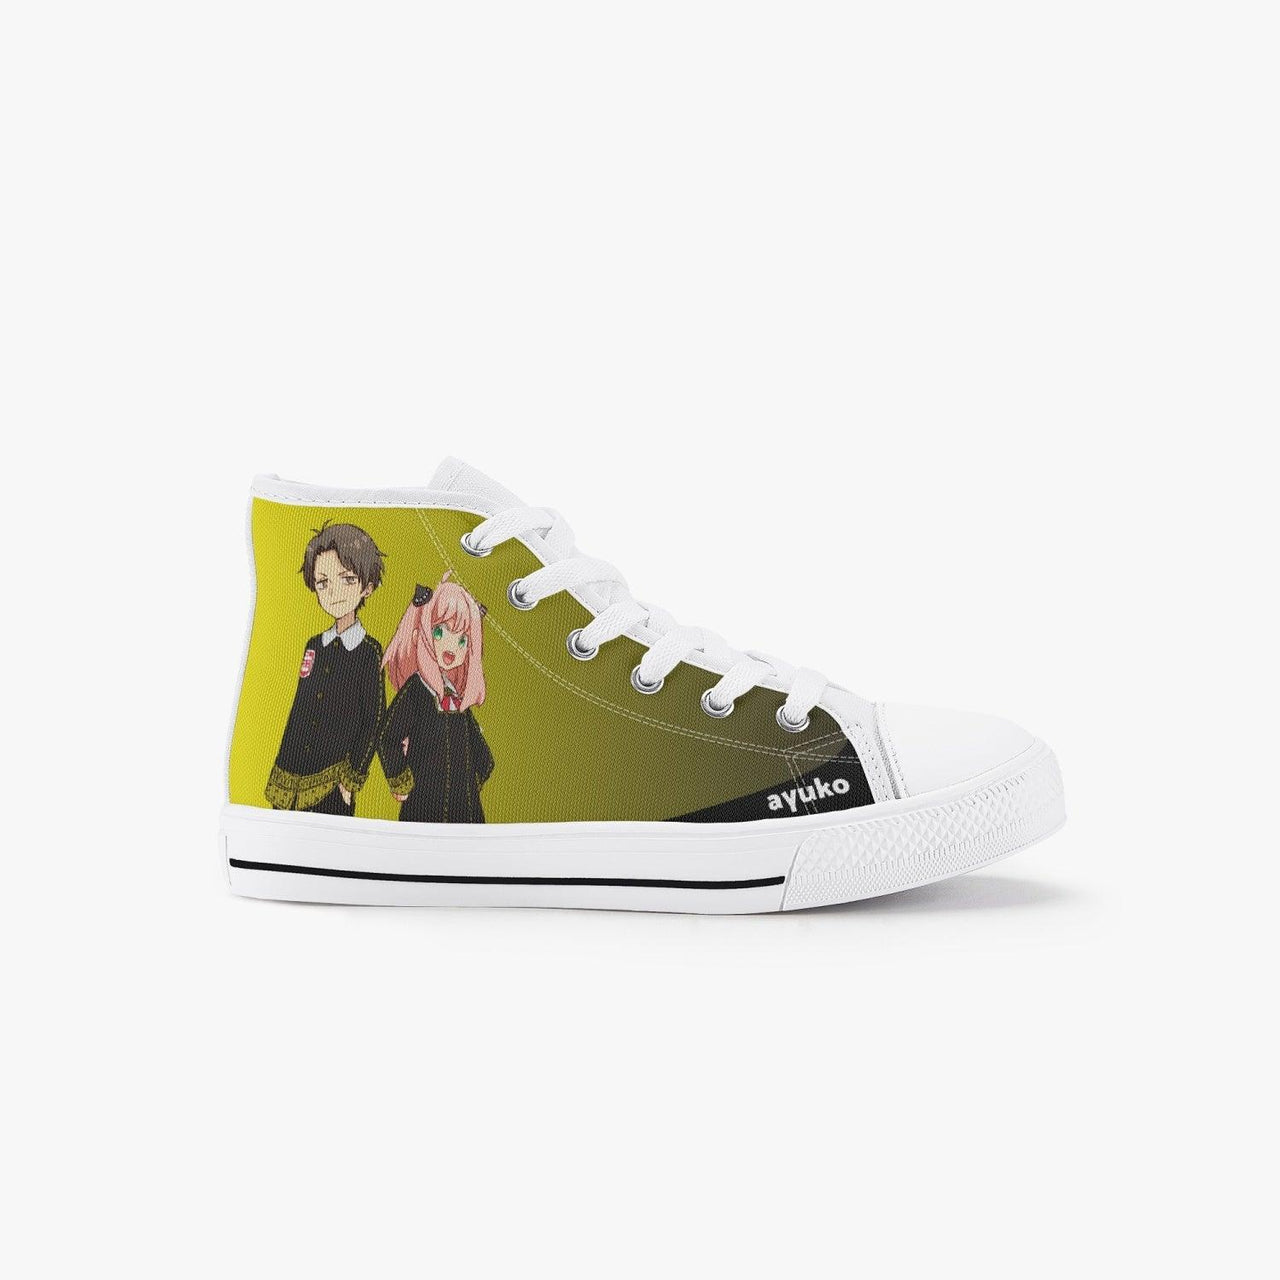 Psy x Family Anya Forger Kids A-Star High Anime Shoes _ Psy x Family _ Ayuko